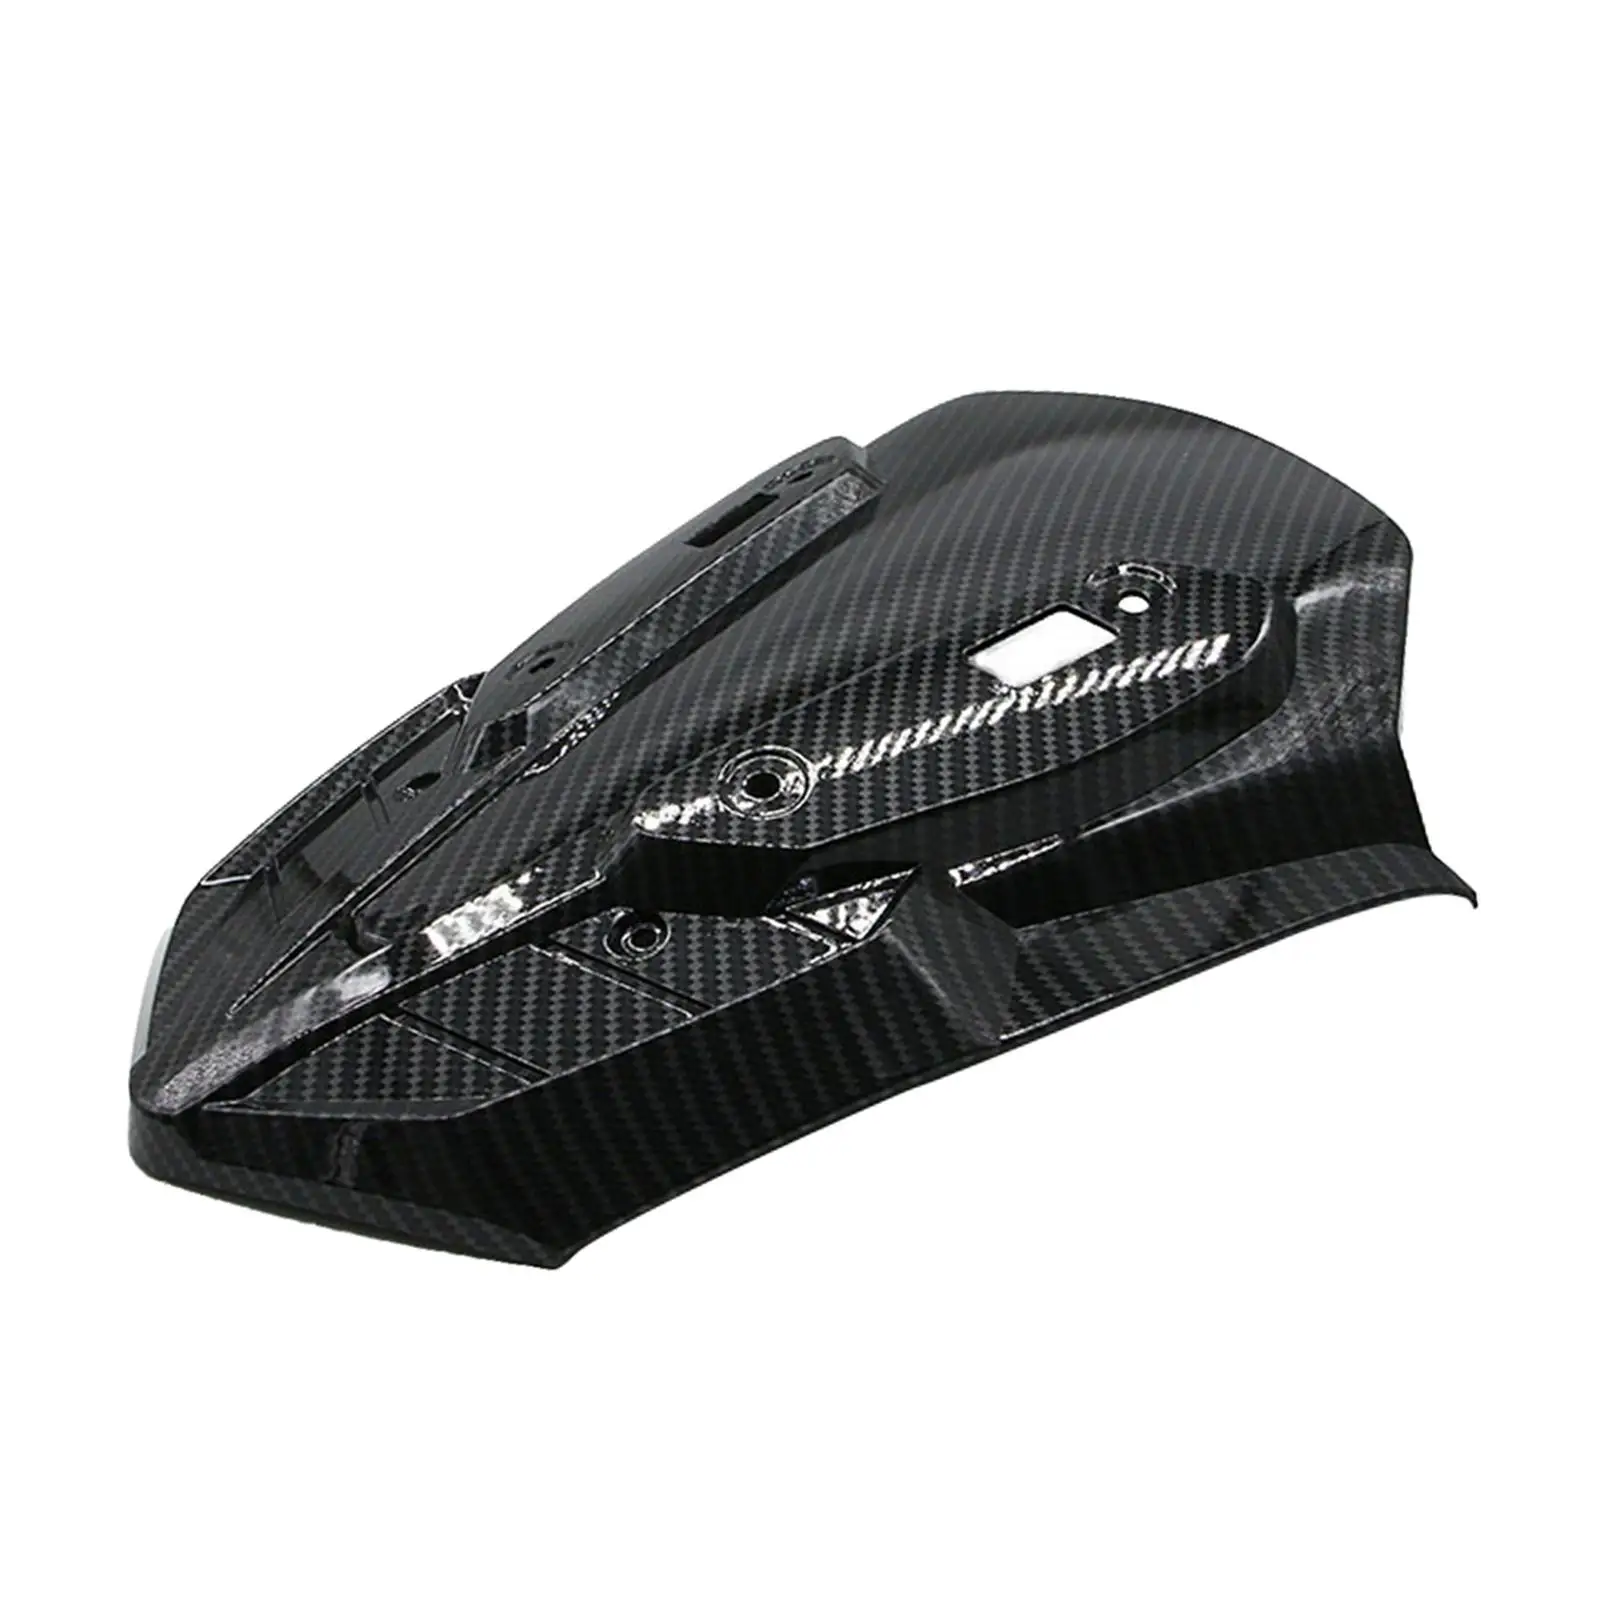 Carbon Fiber Front Windshield Guard Cover for Yamaha N-Max155 2020-21 Air Flow Wind Deflector Motorbike Parts Vehicle